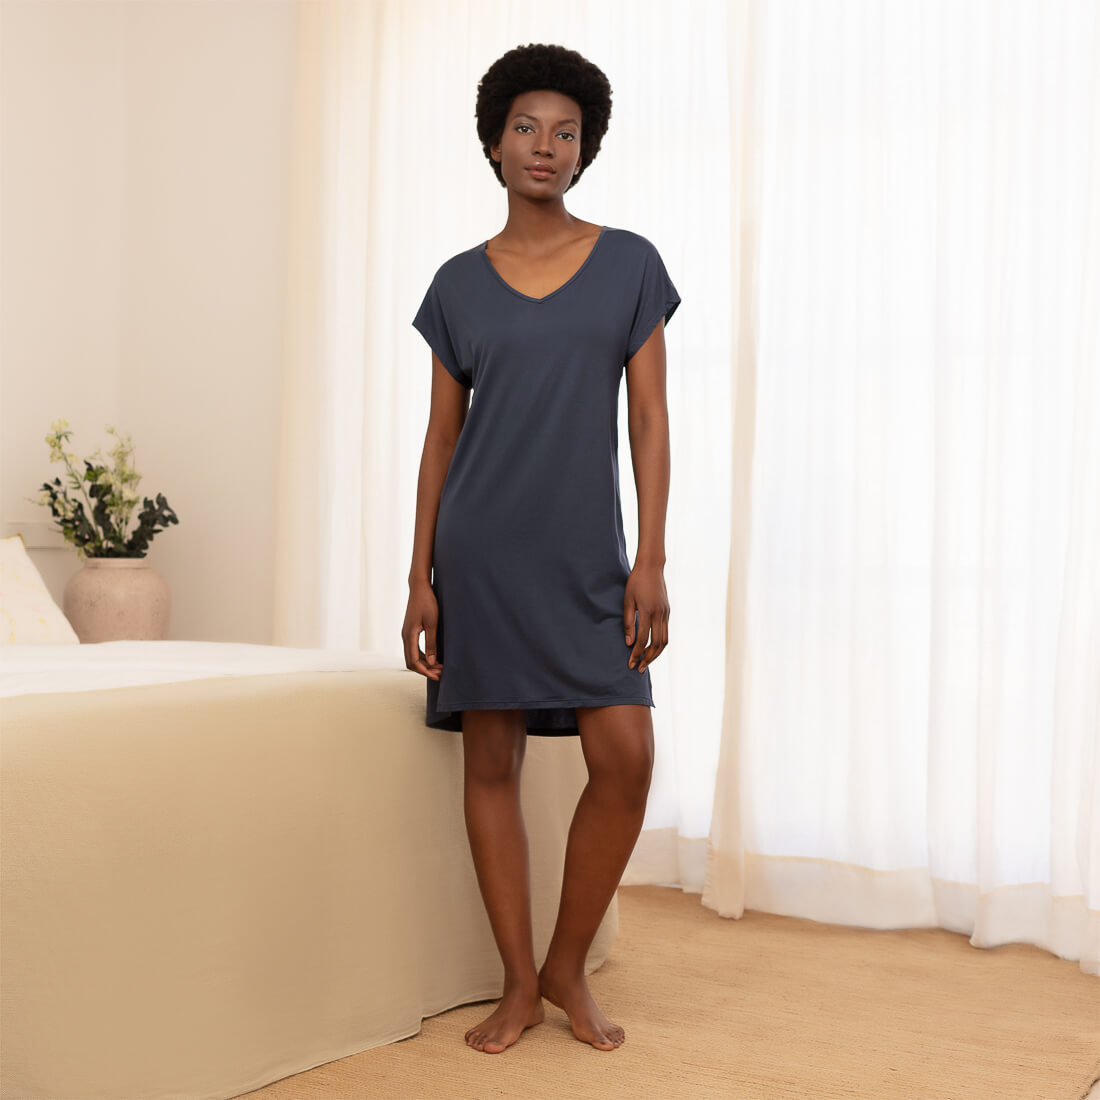 Cooling nightgown women || Cool grey